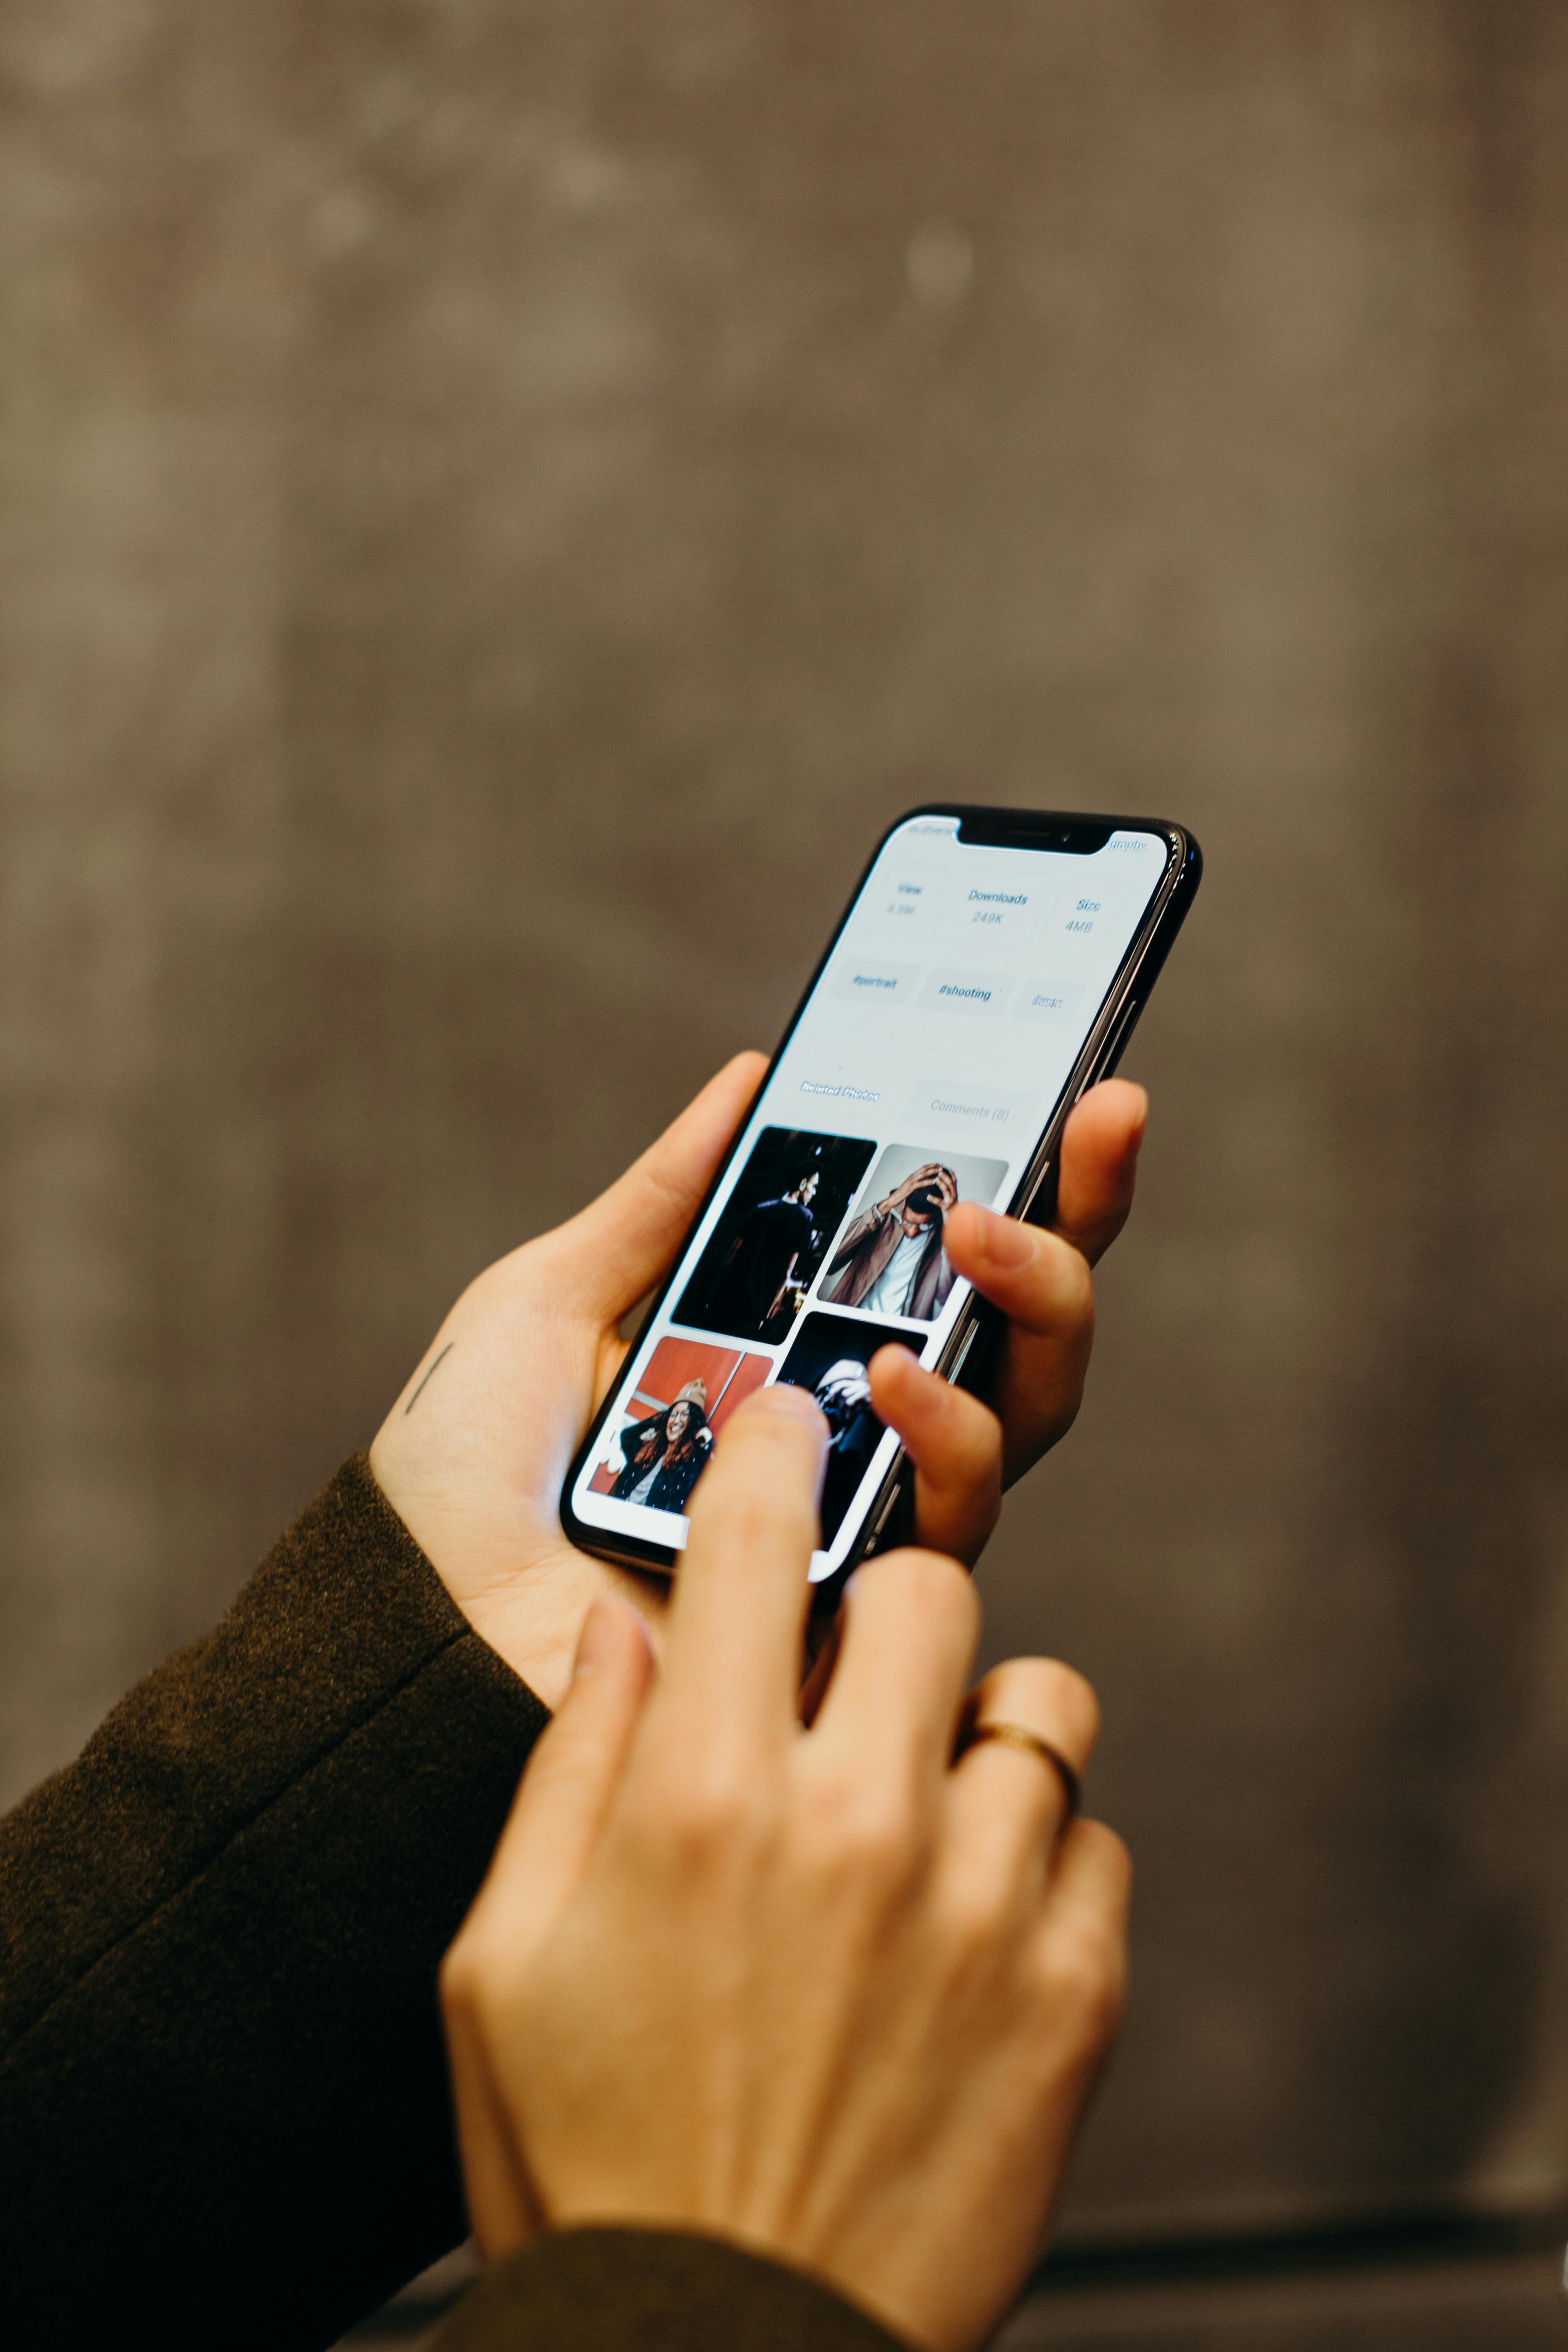 A person holding a phone | Source: Pexels